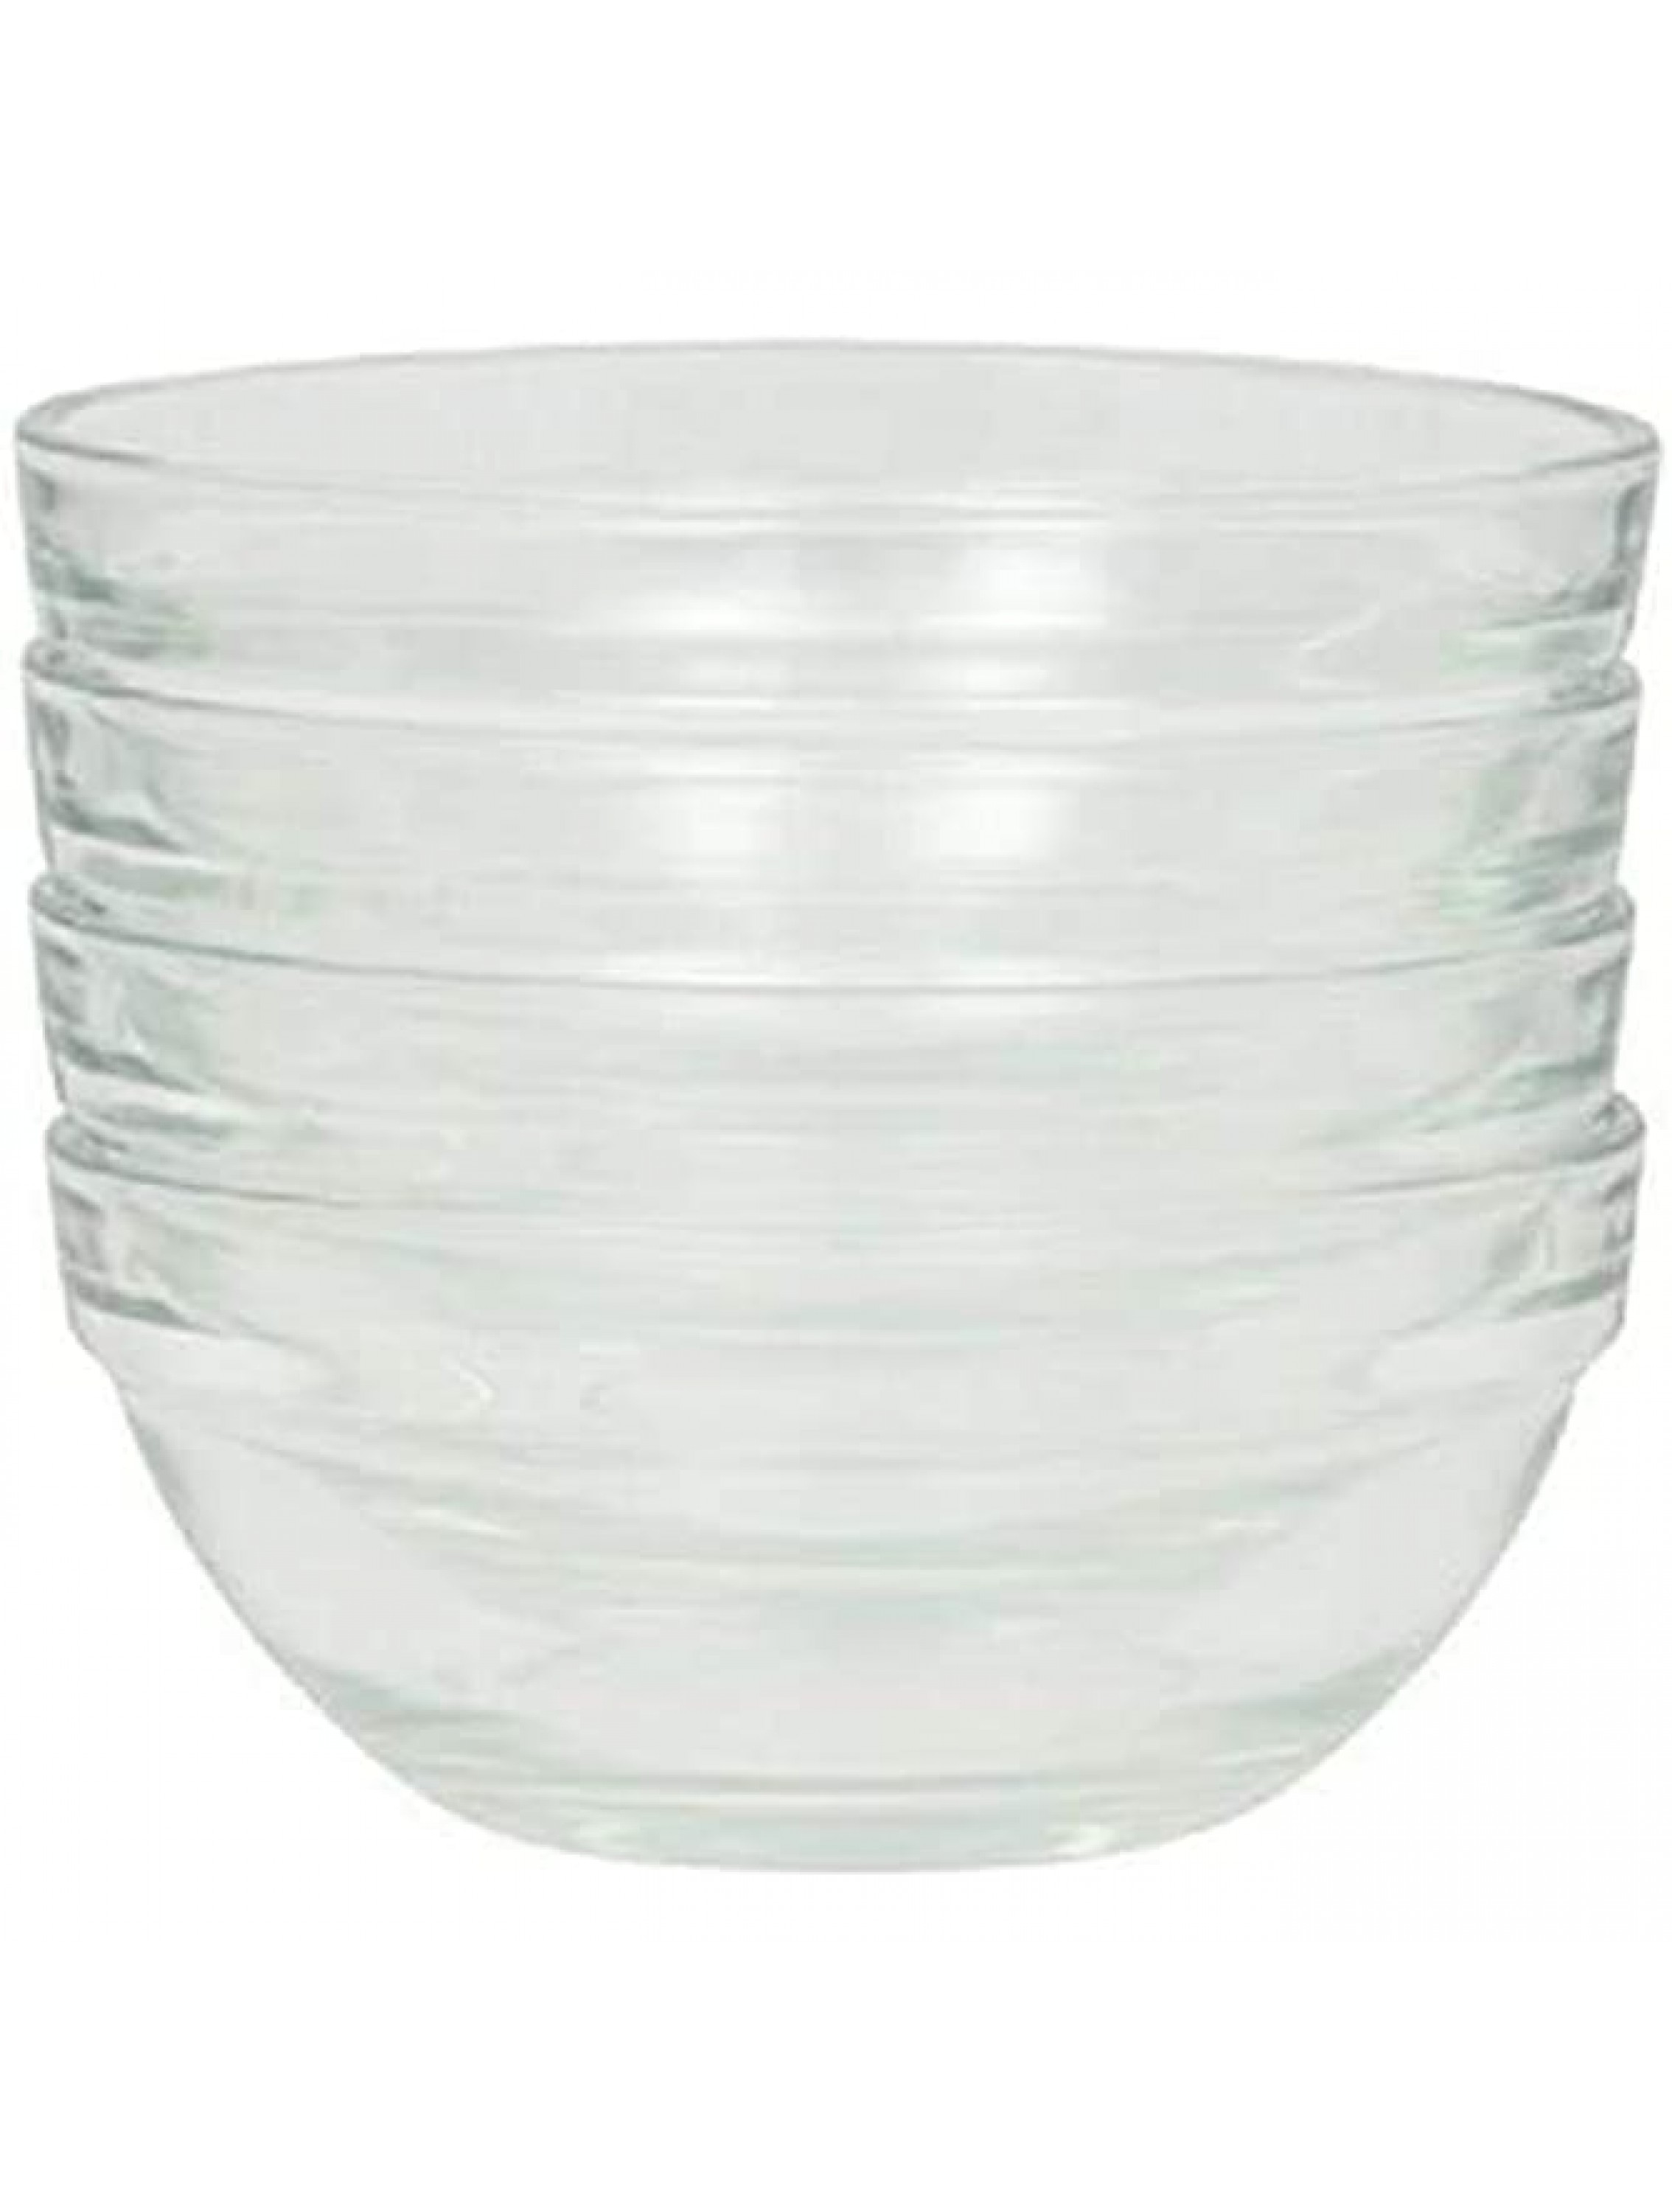 Set of 4 Stackable 3.5-Inch Serving Mixing Prep Clear Glass Bowls. - BP0NC2O9U